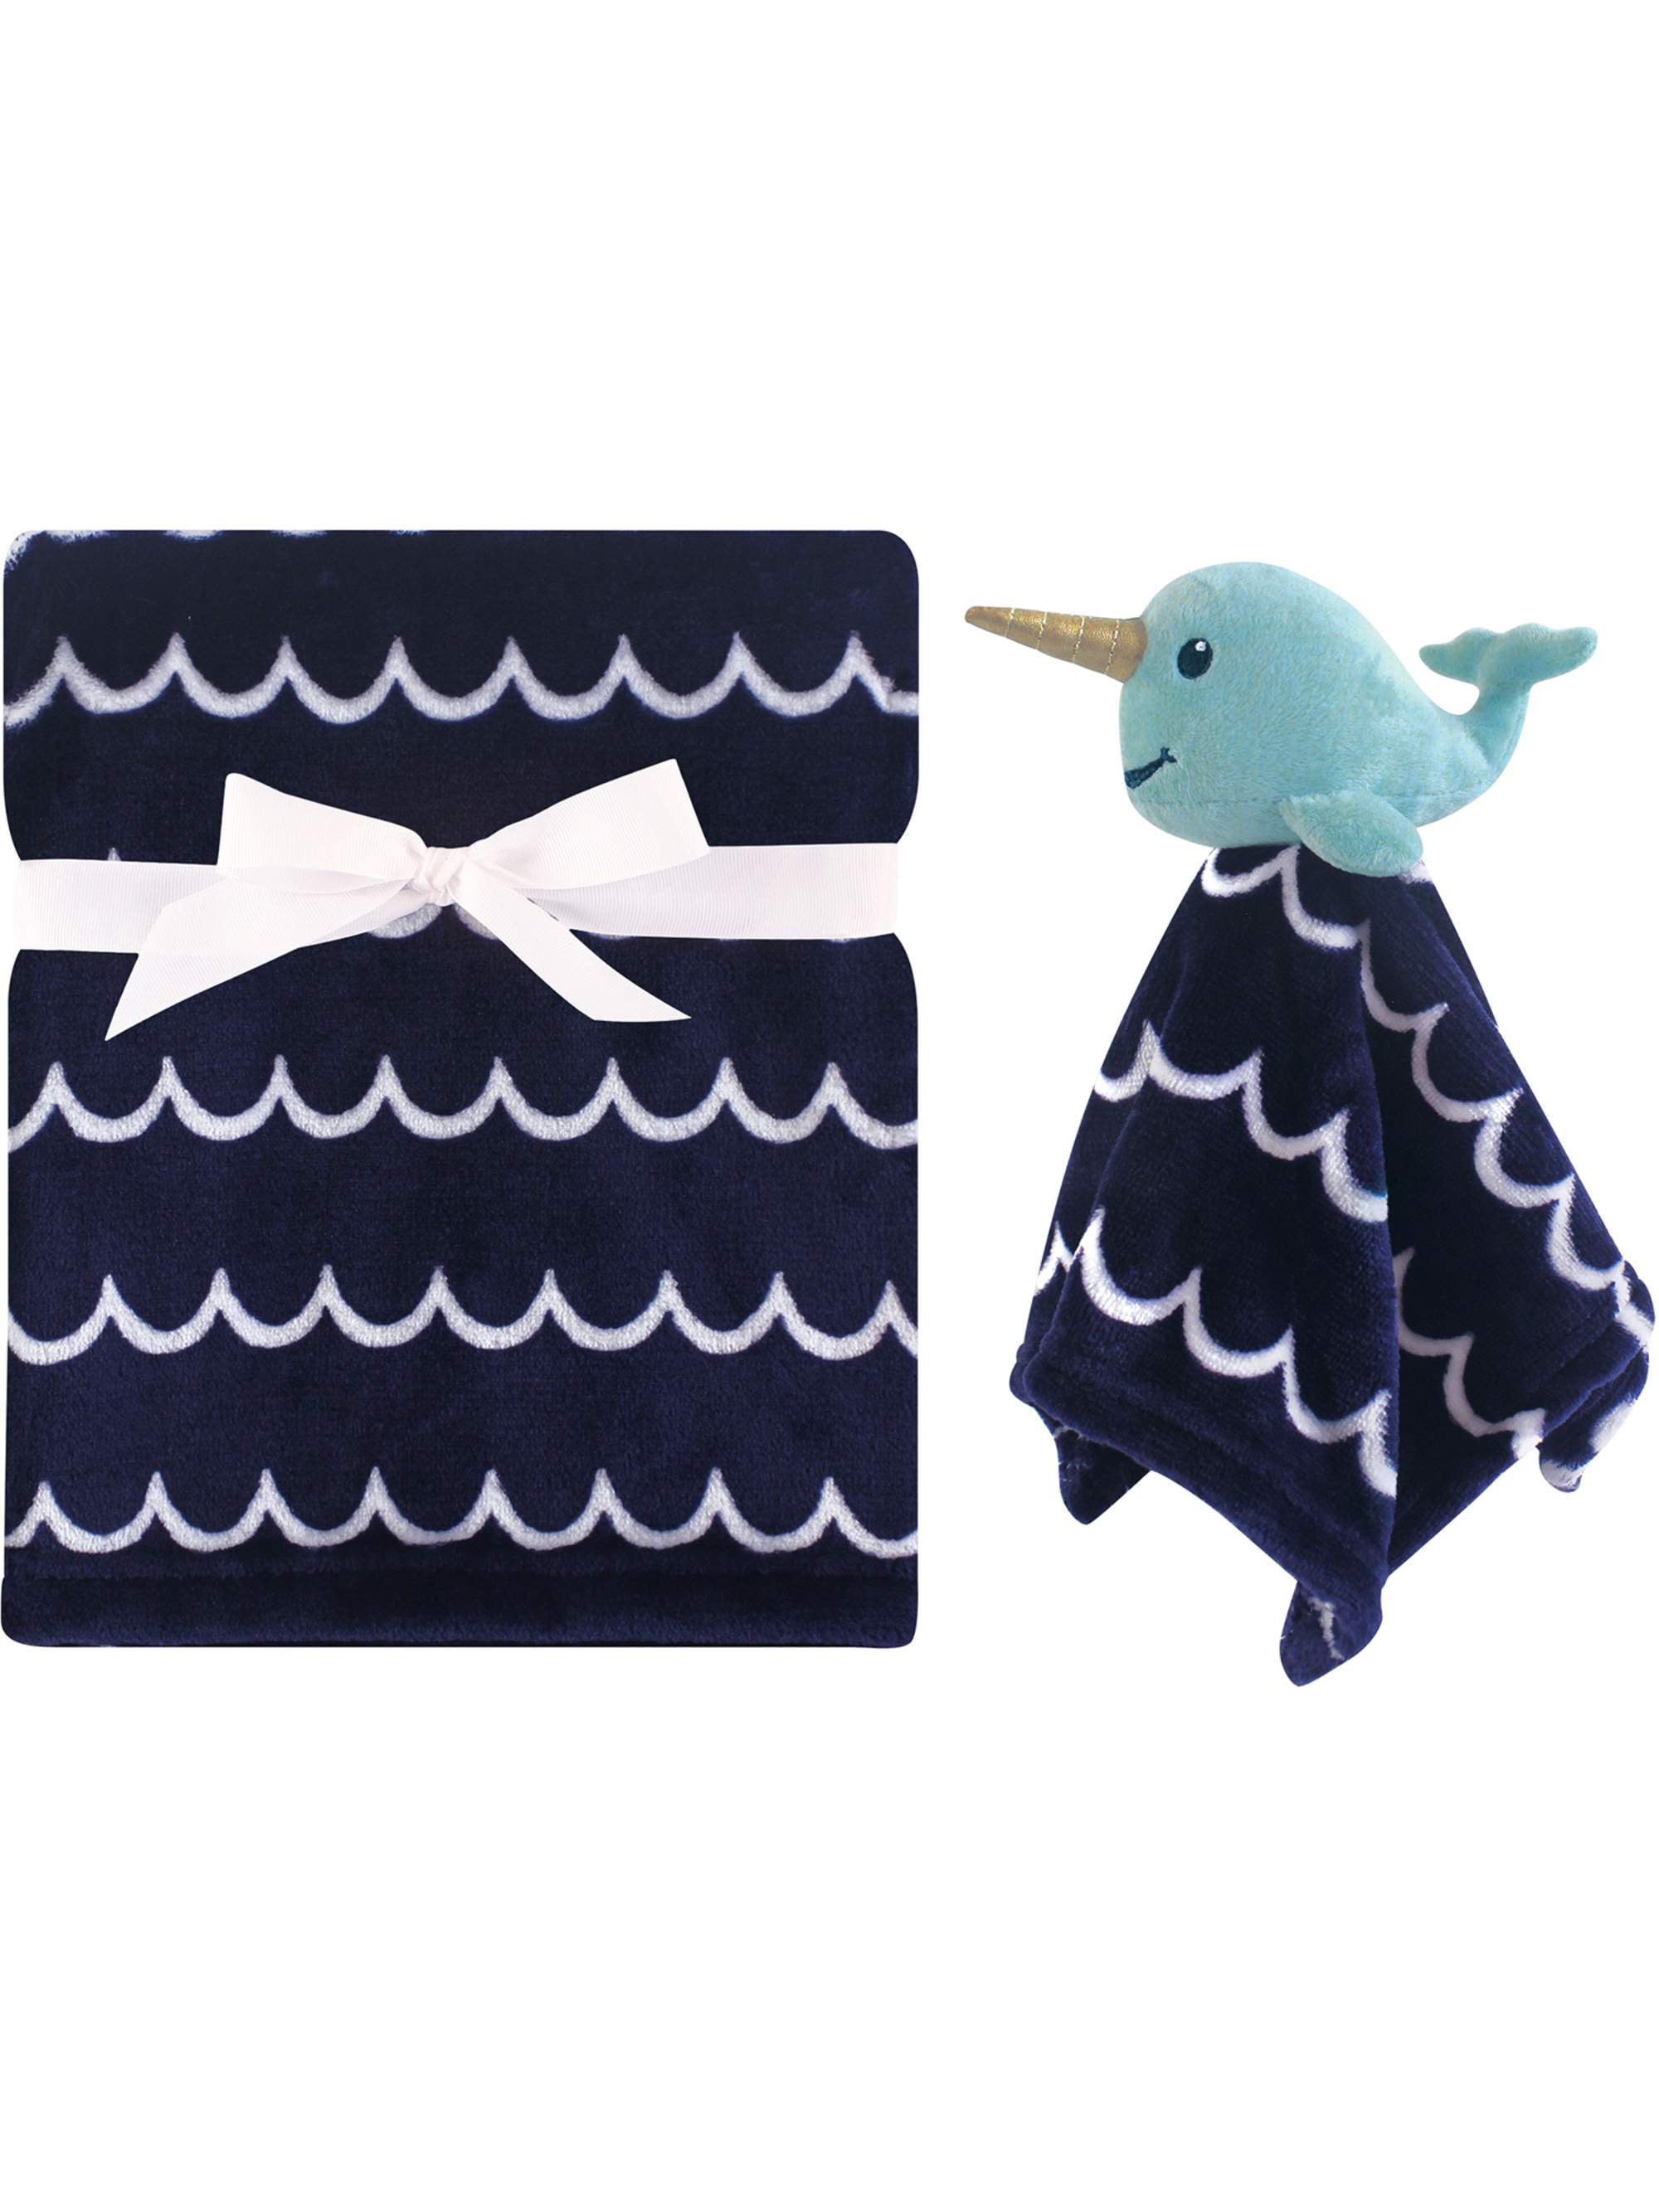 narwhal baby blanket